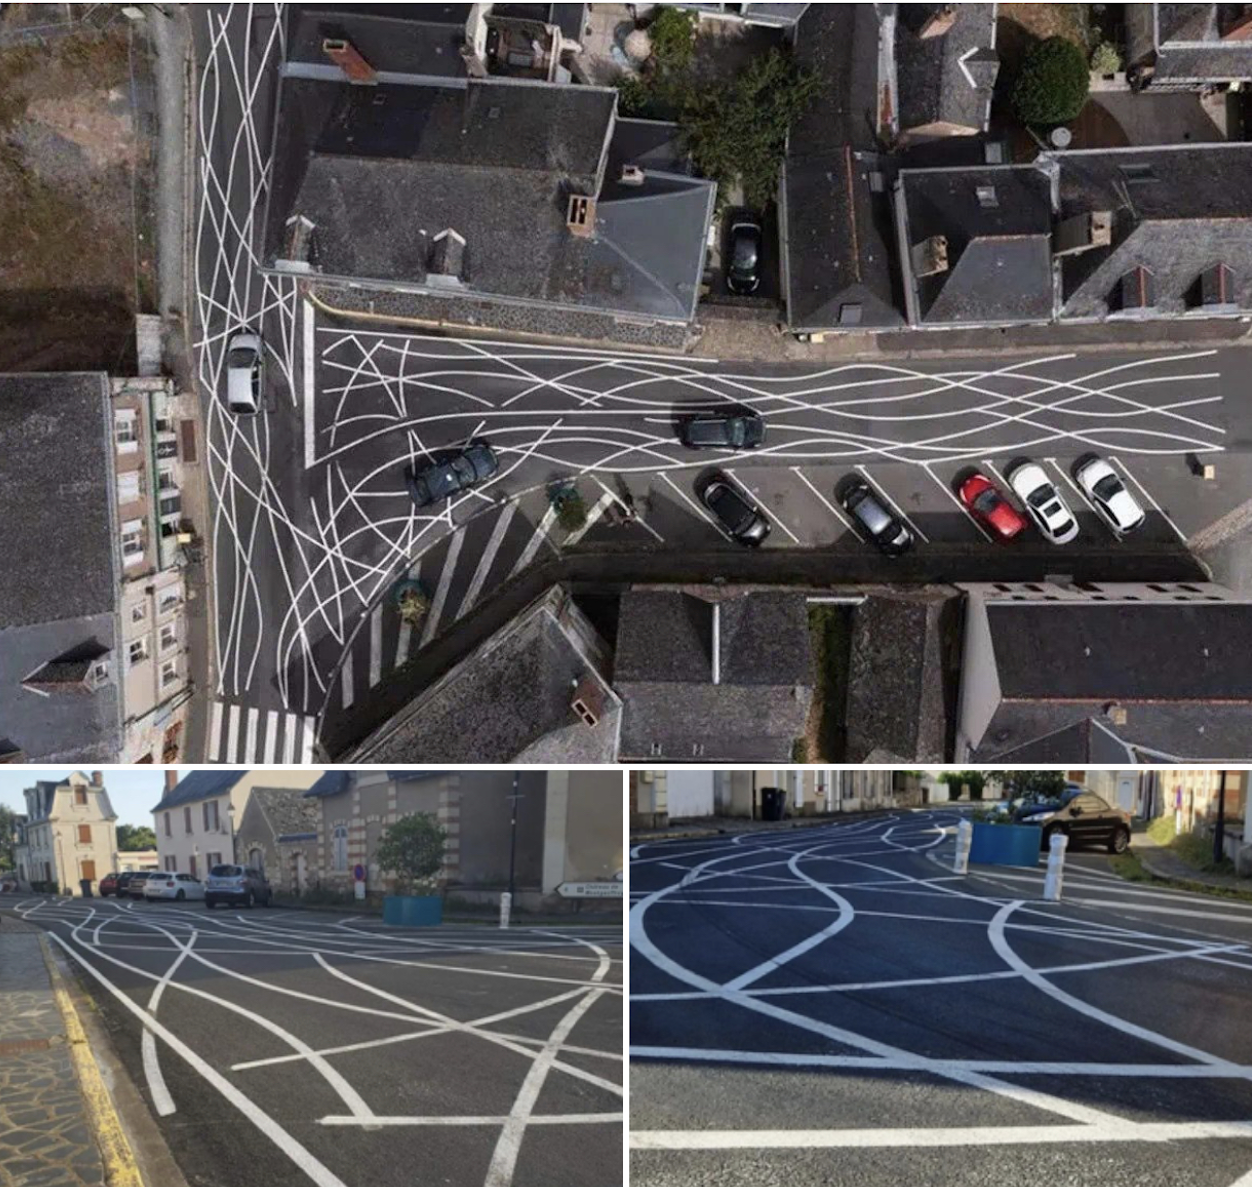 Multiple images of a street in France from various perspectives, where the lines drawn on the street are drawn unpredictably and in an overlapping fashion.